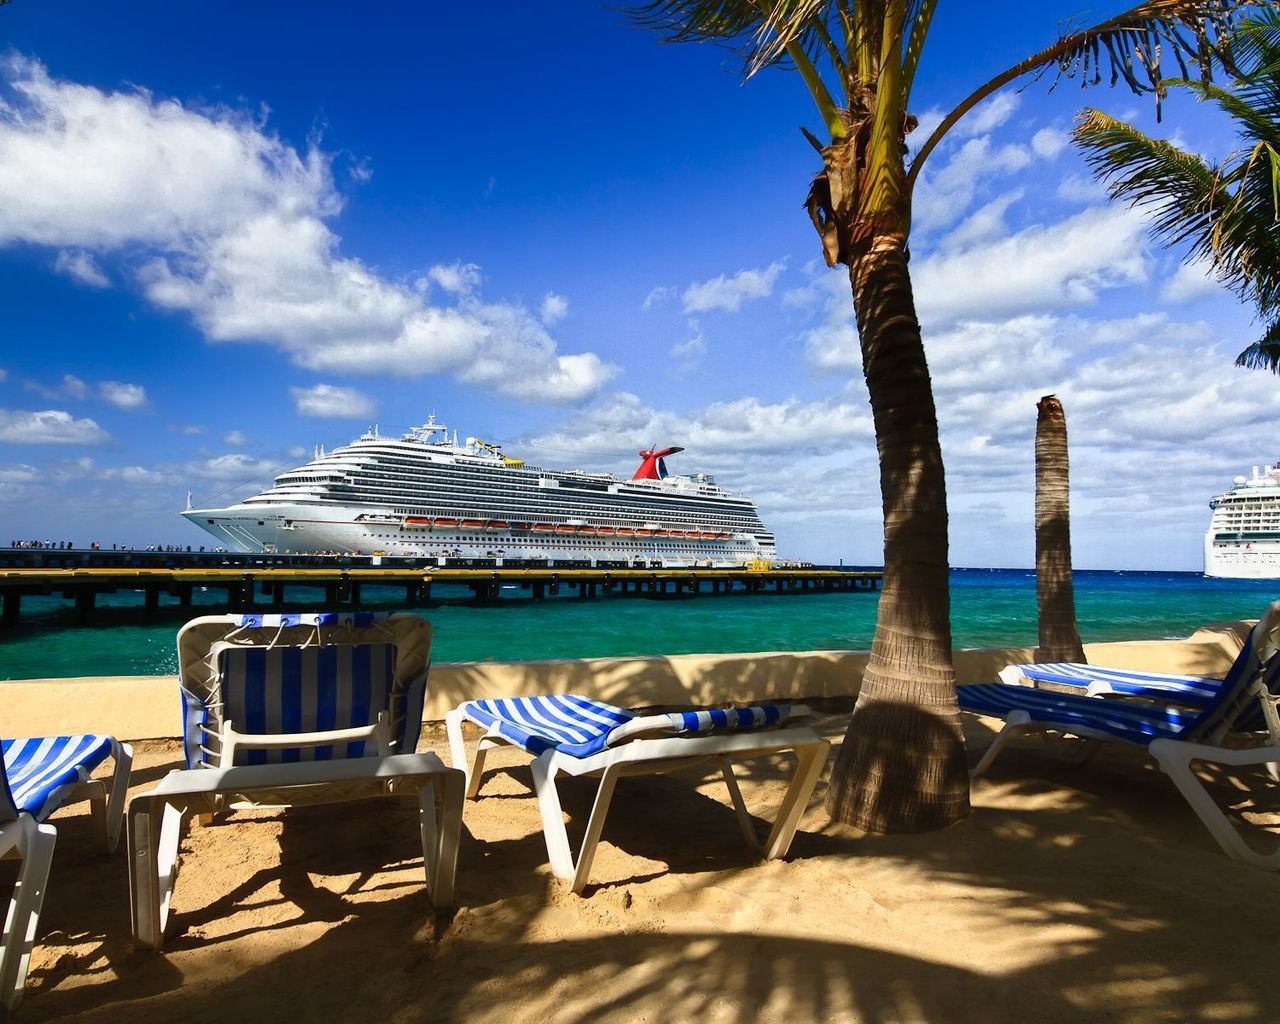 Cruise Ships for 1280 x 1024 resolution